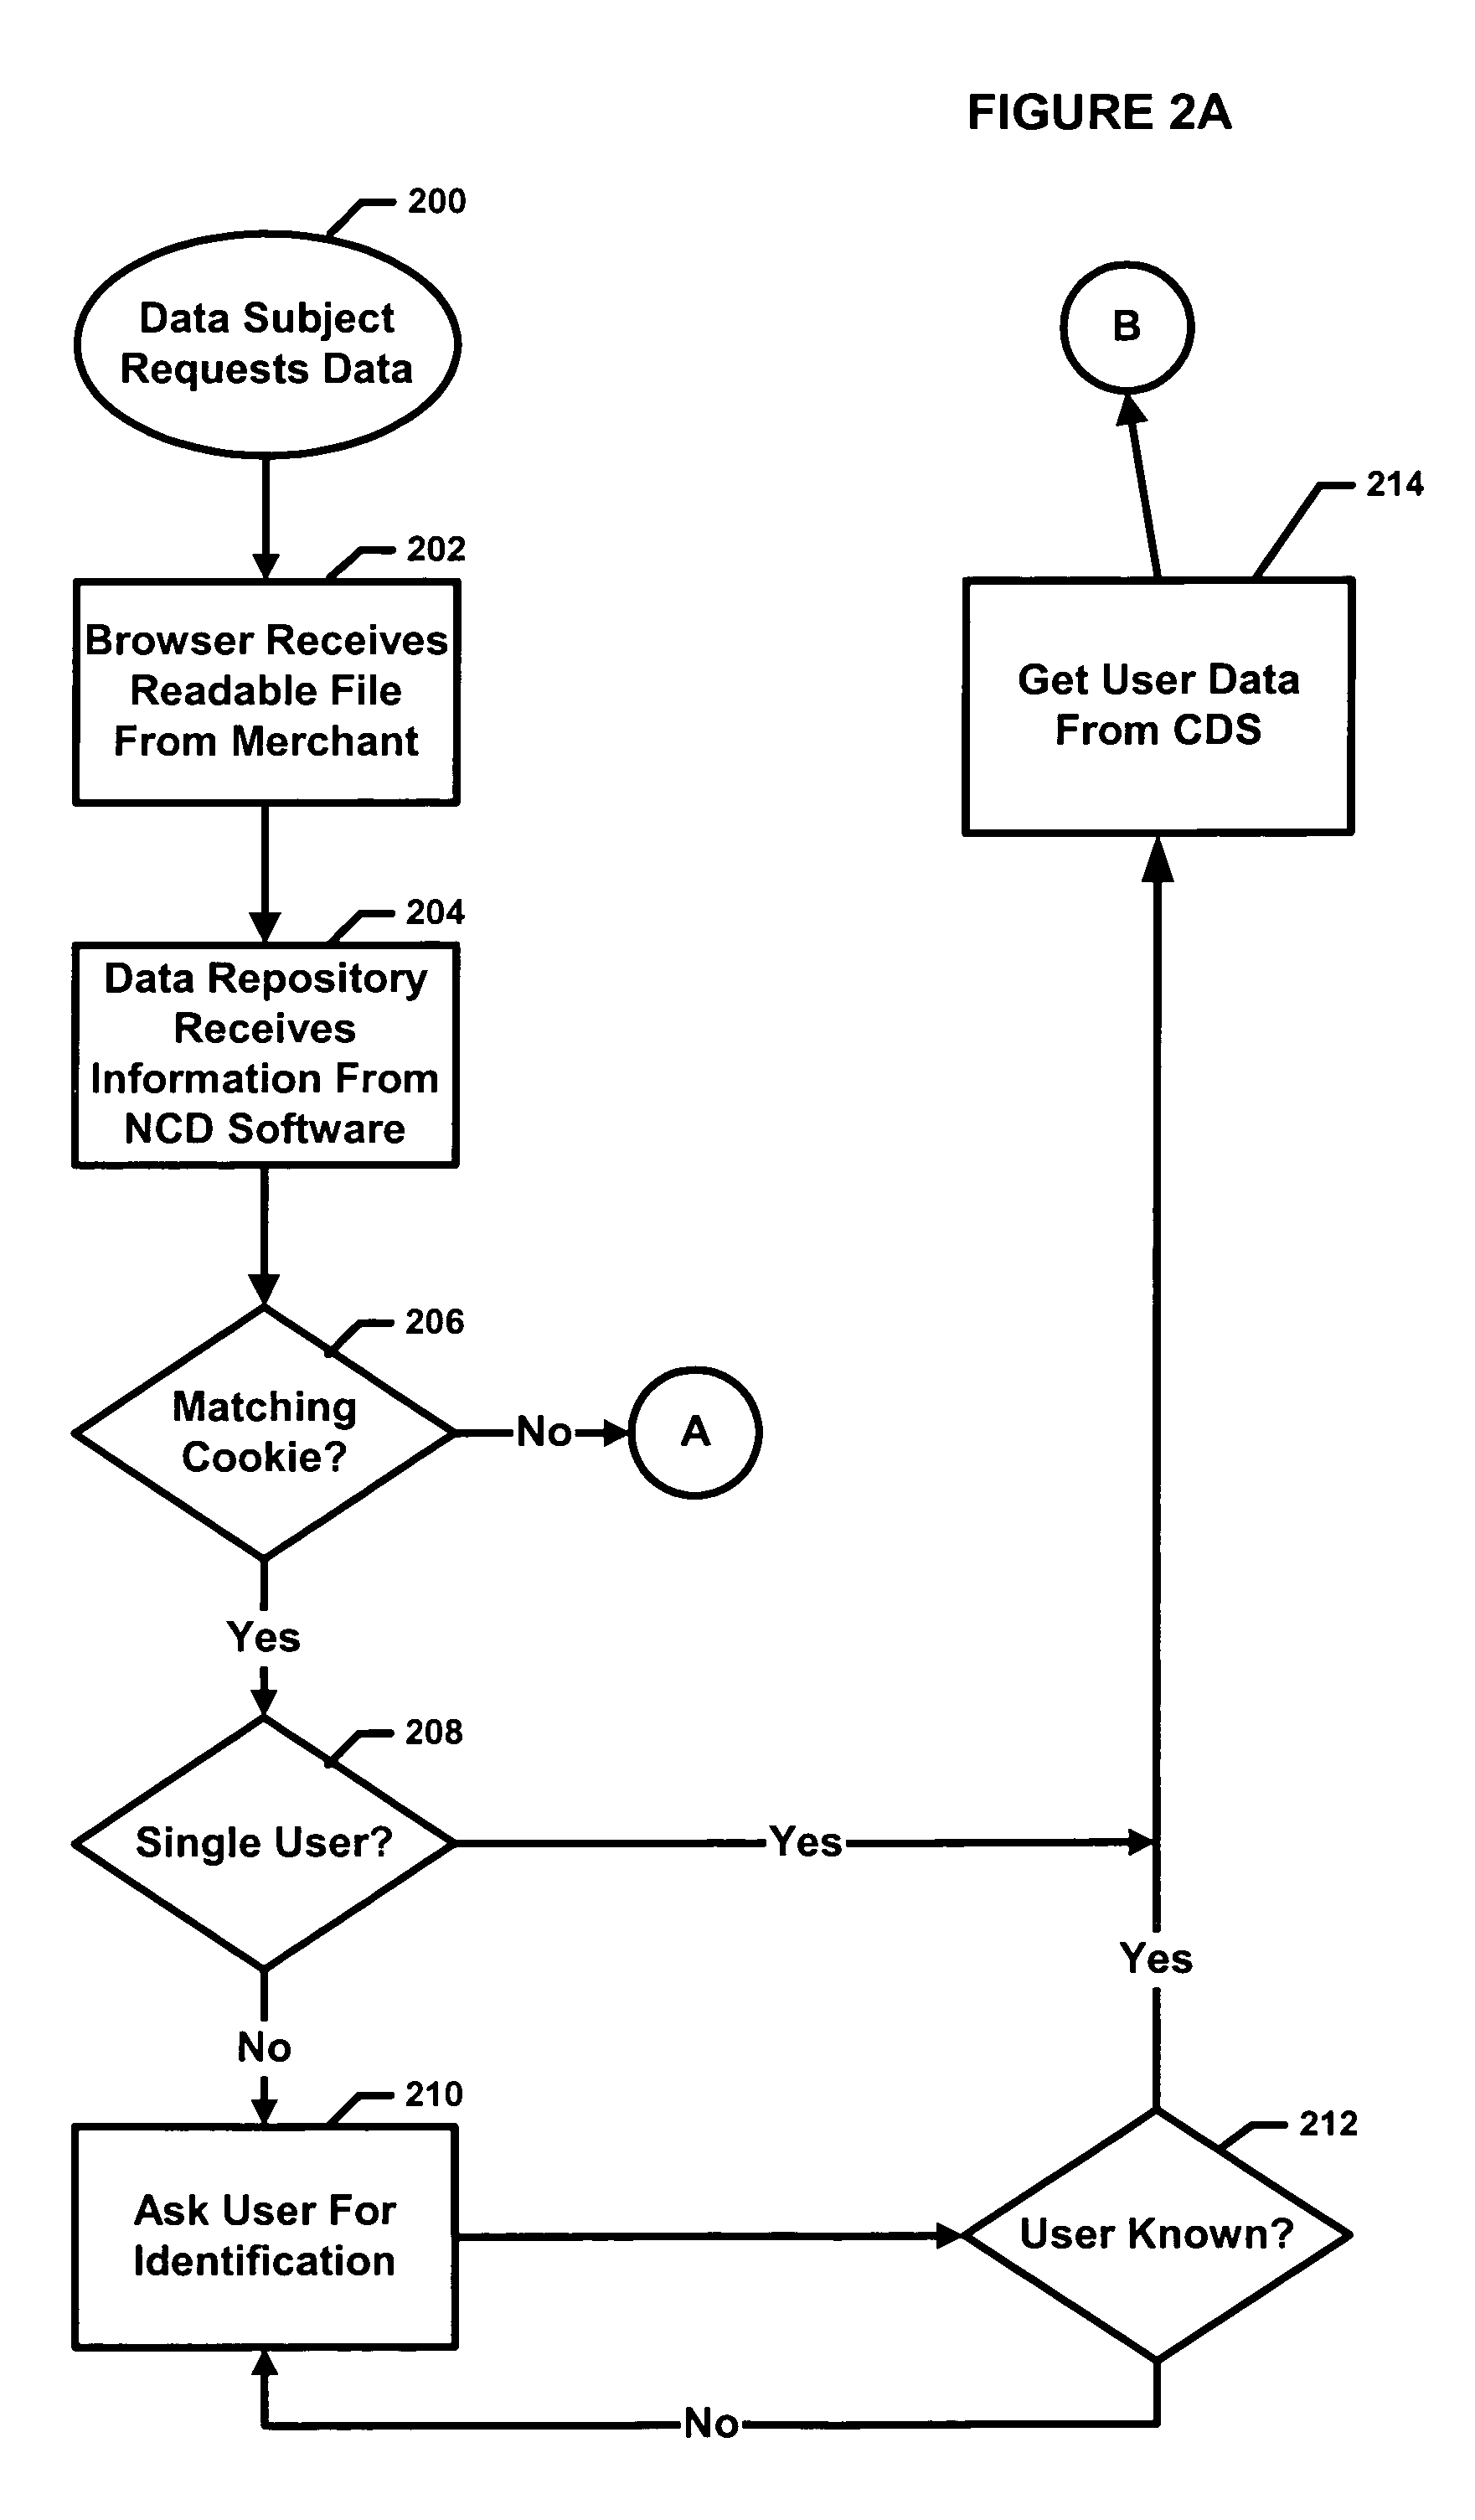 Method and apparatus for data recipient storage and retrieval of data using a network communication device